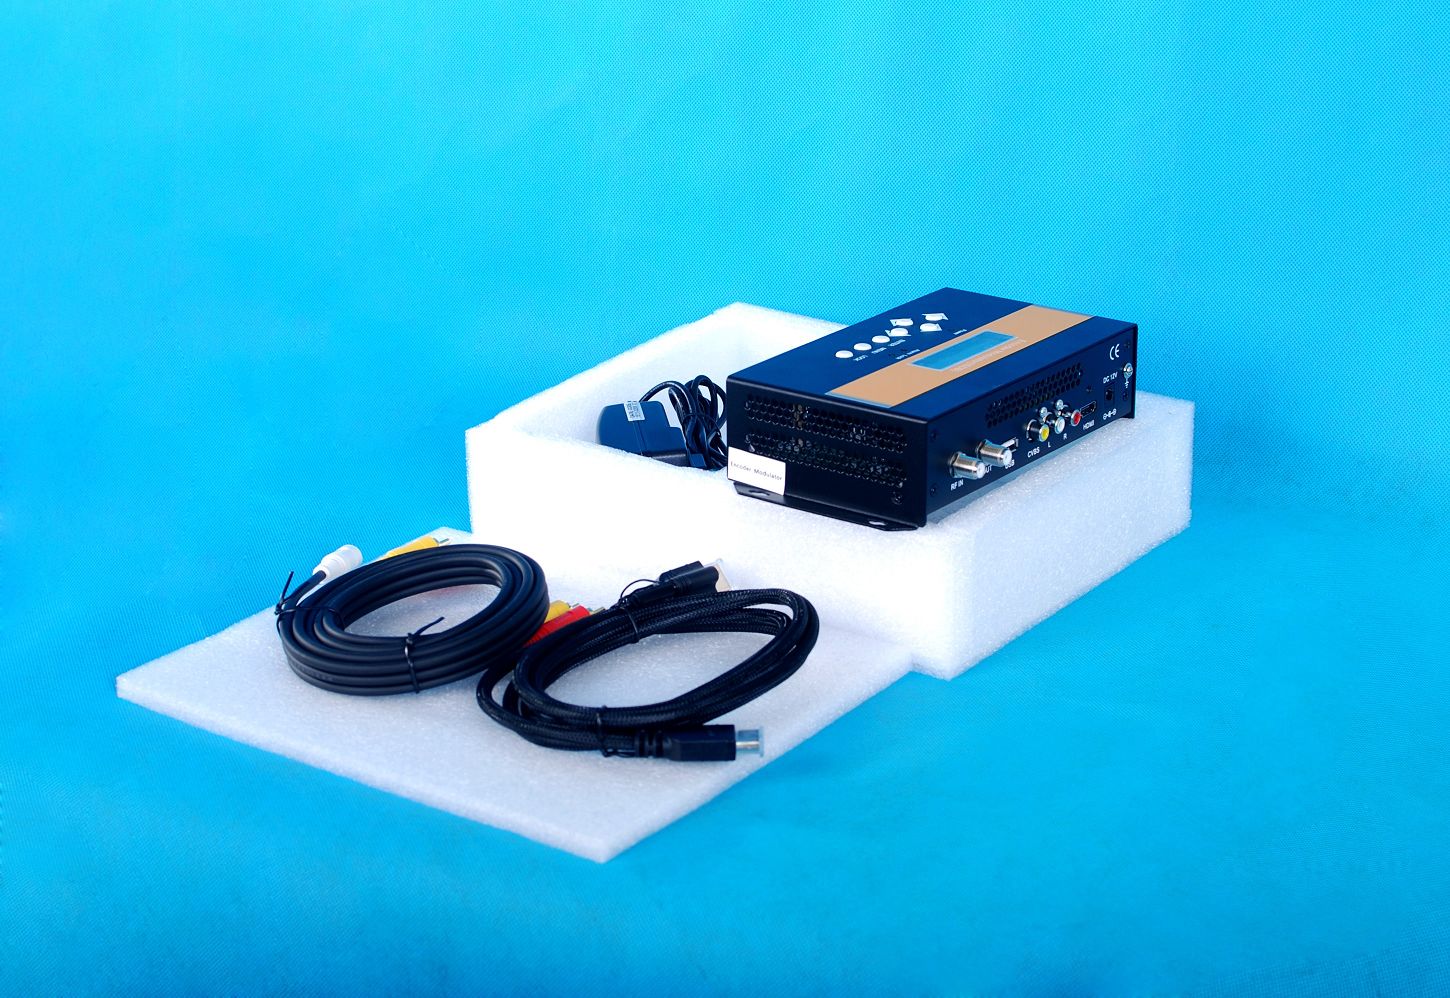 hdmi to rf coaxial converter adapter package.jpg